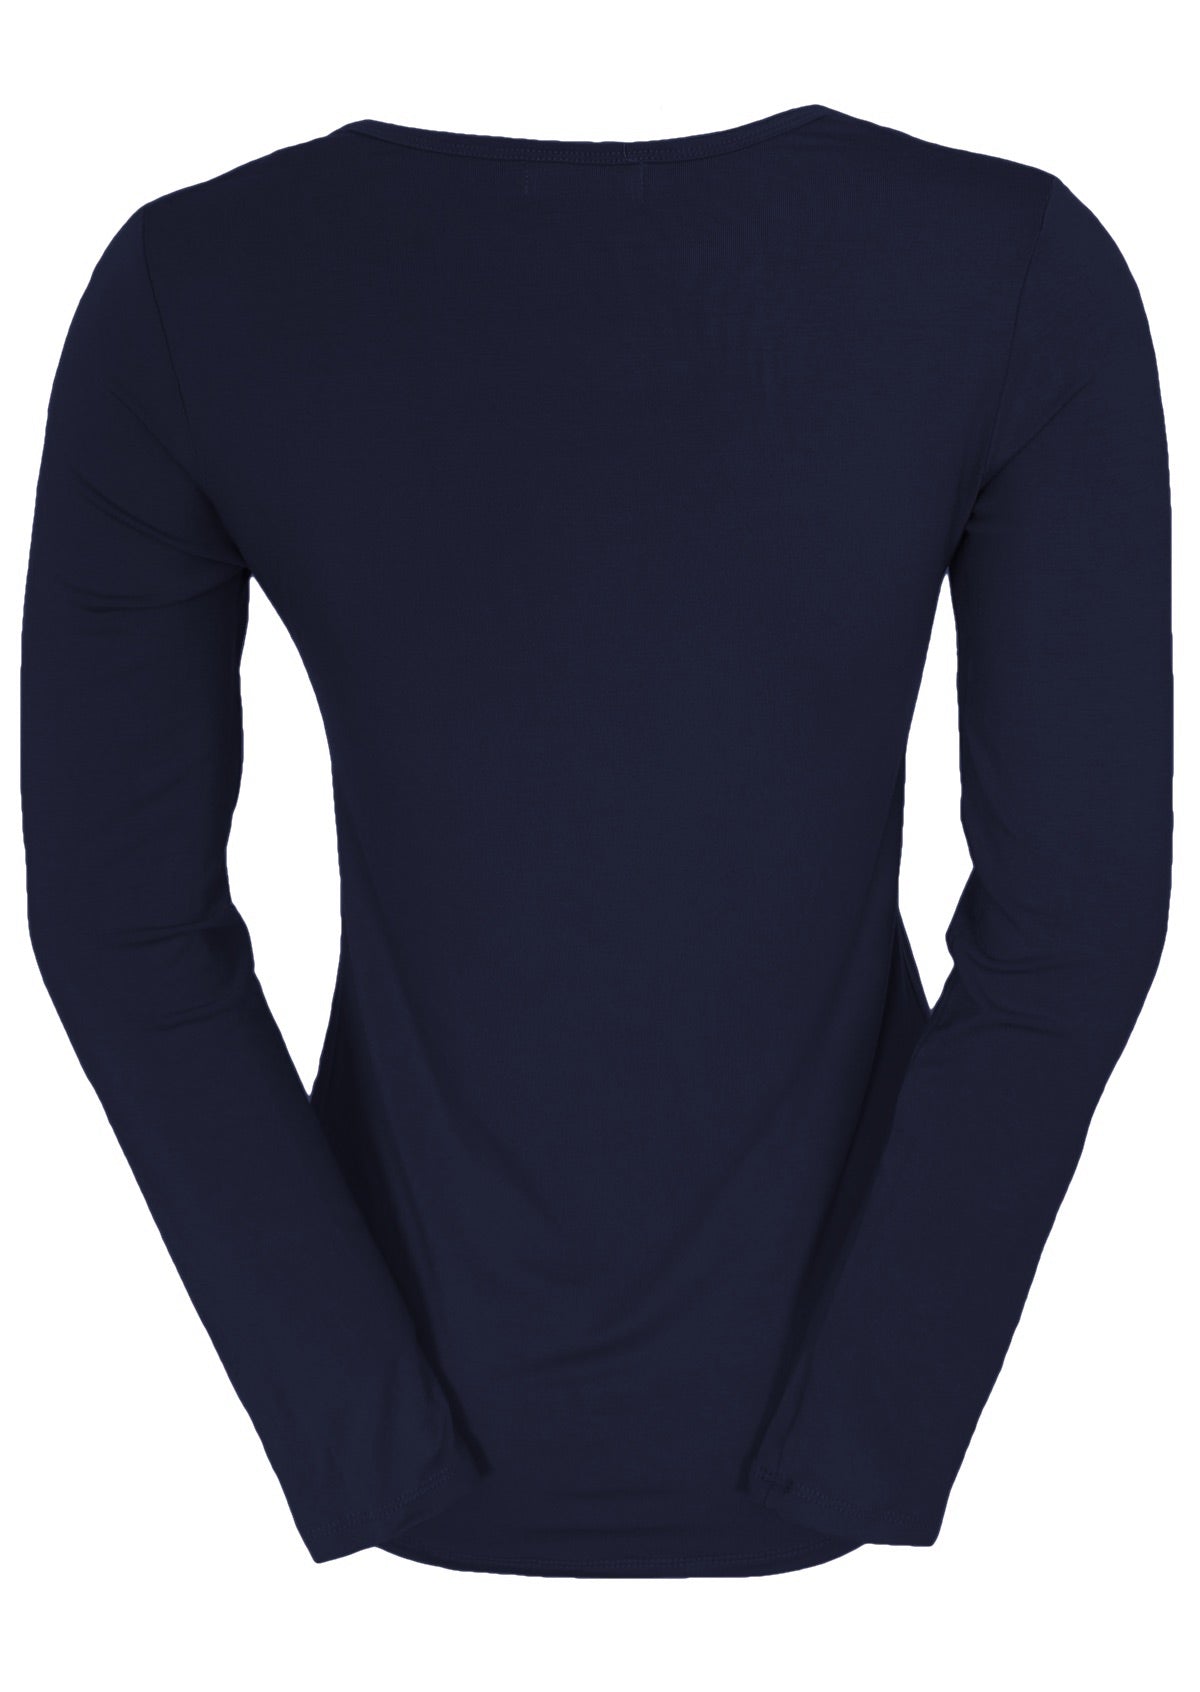 Back view of women's round neck navy blue long sleeve rayon top.